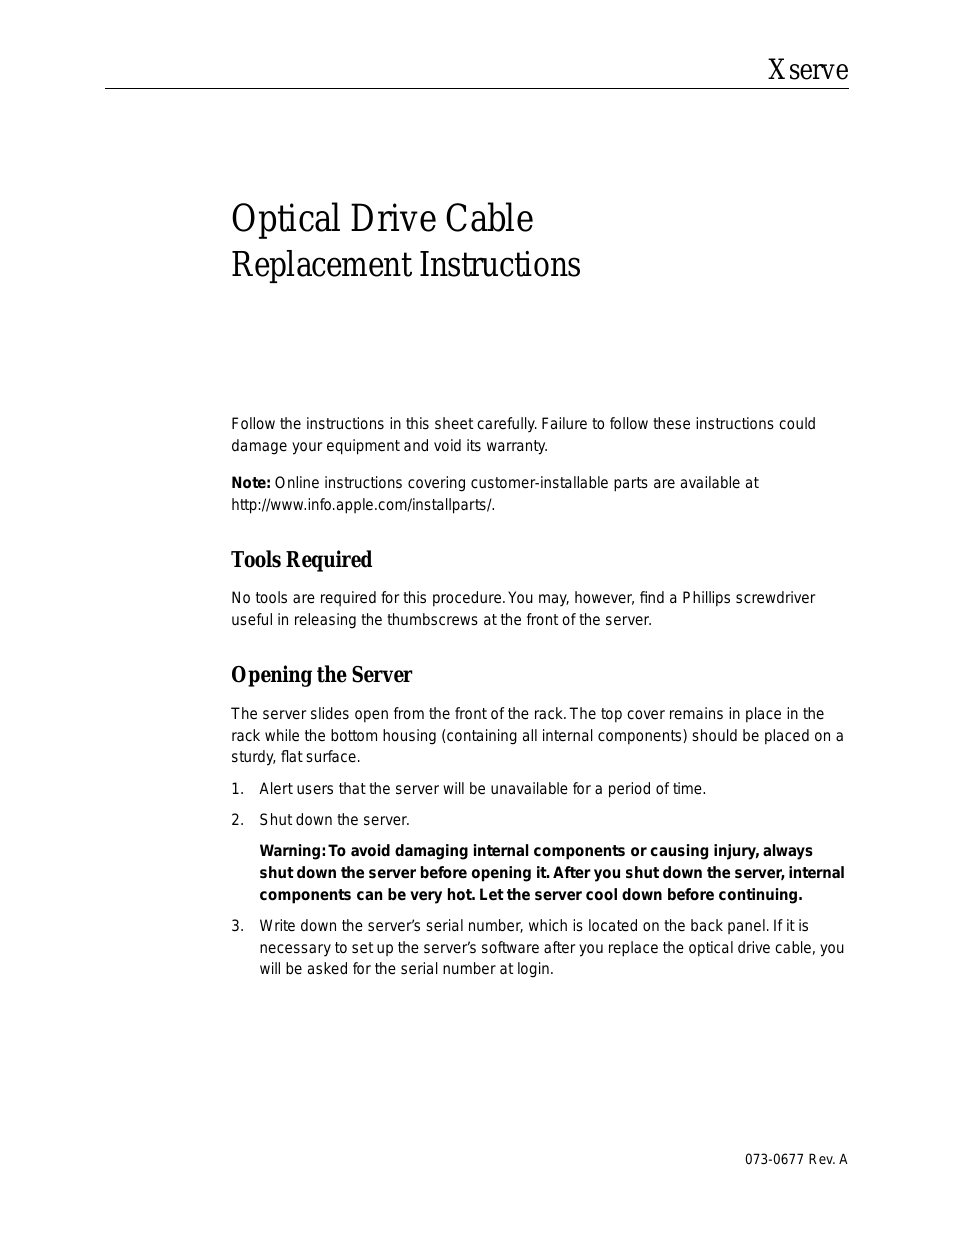 Optical Drive Cable